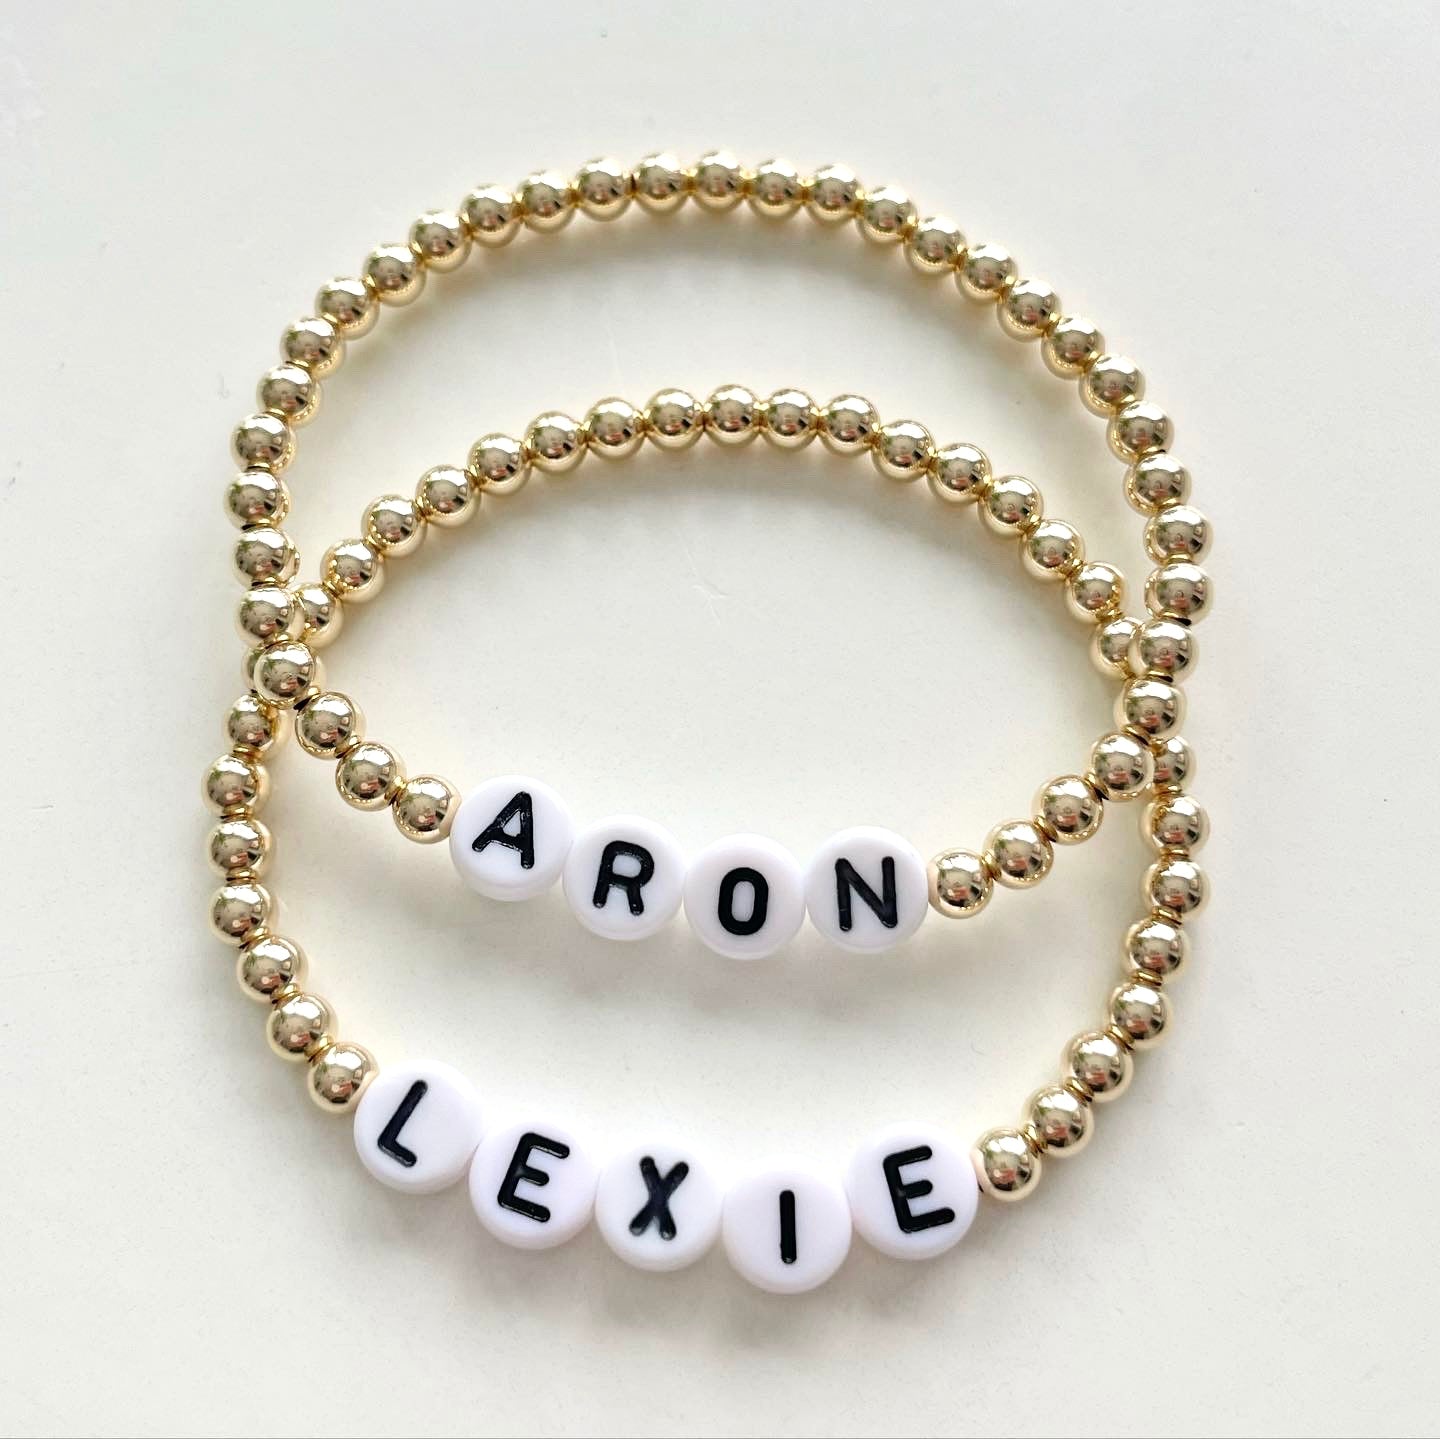 The Lily, Initial or Name Bracelet in Gold with Black on White Letter Beads